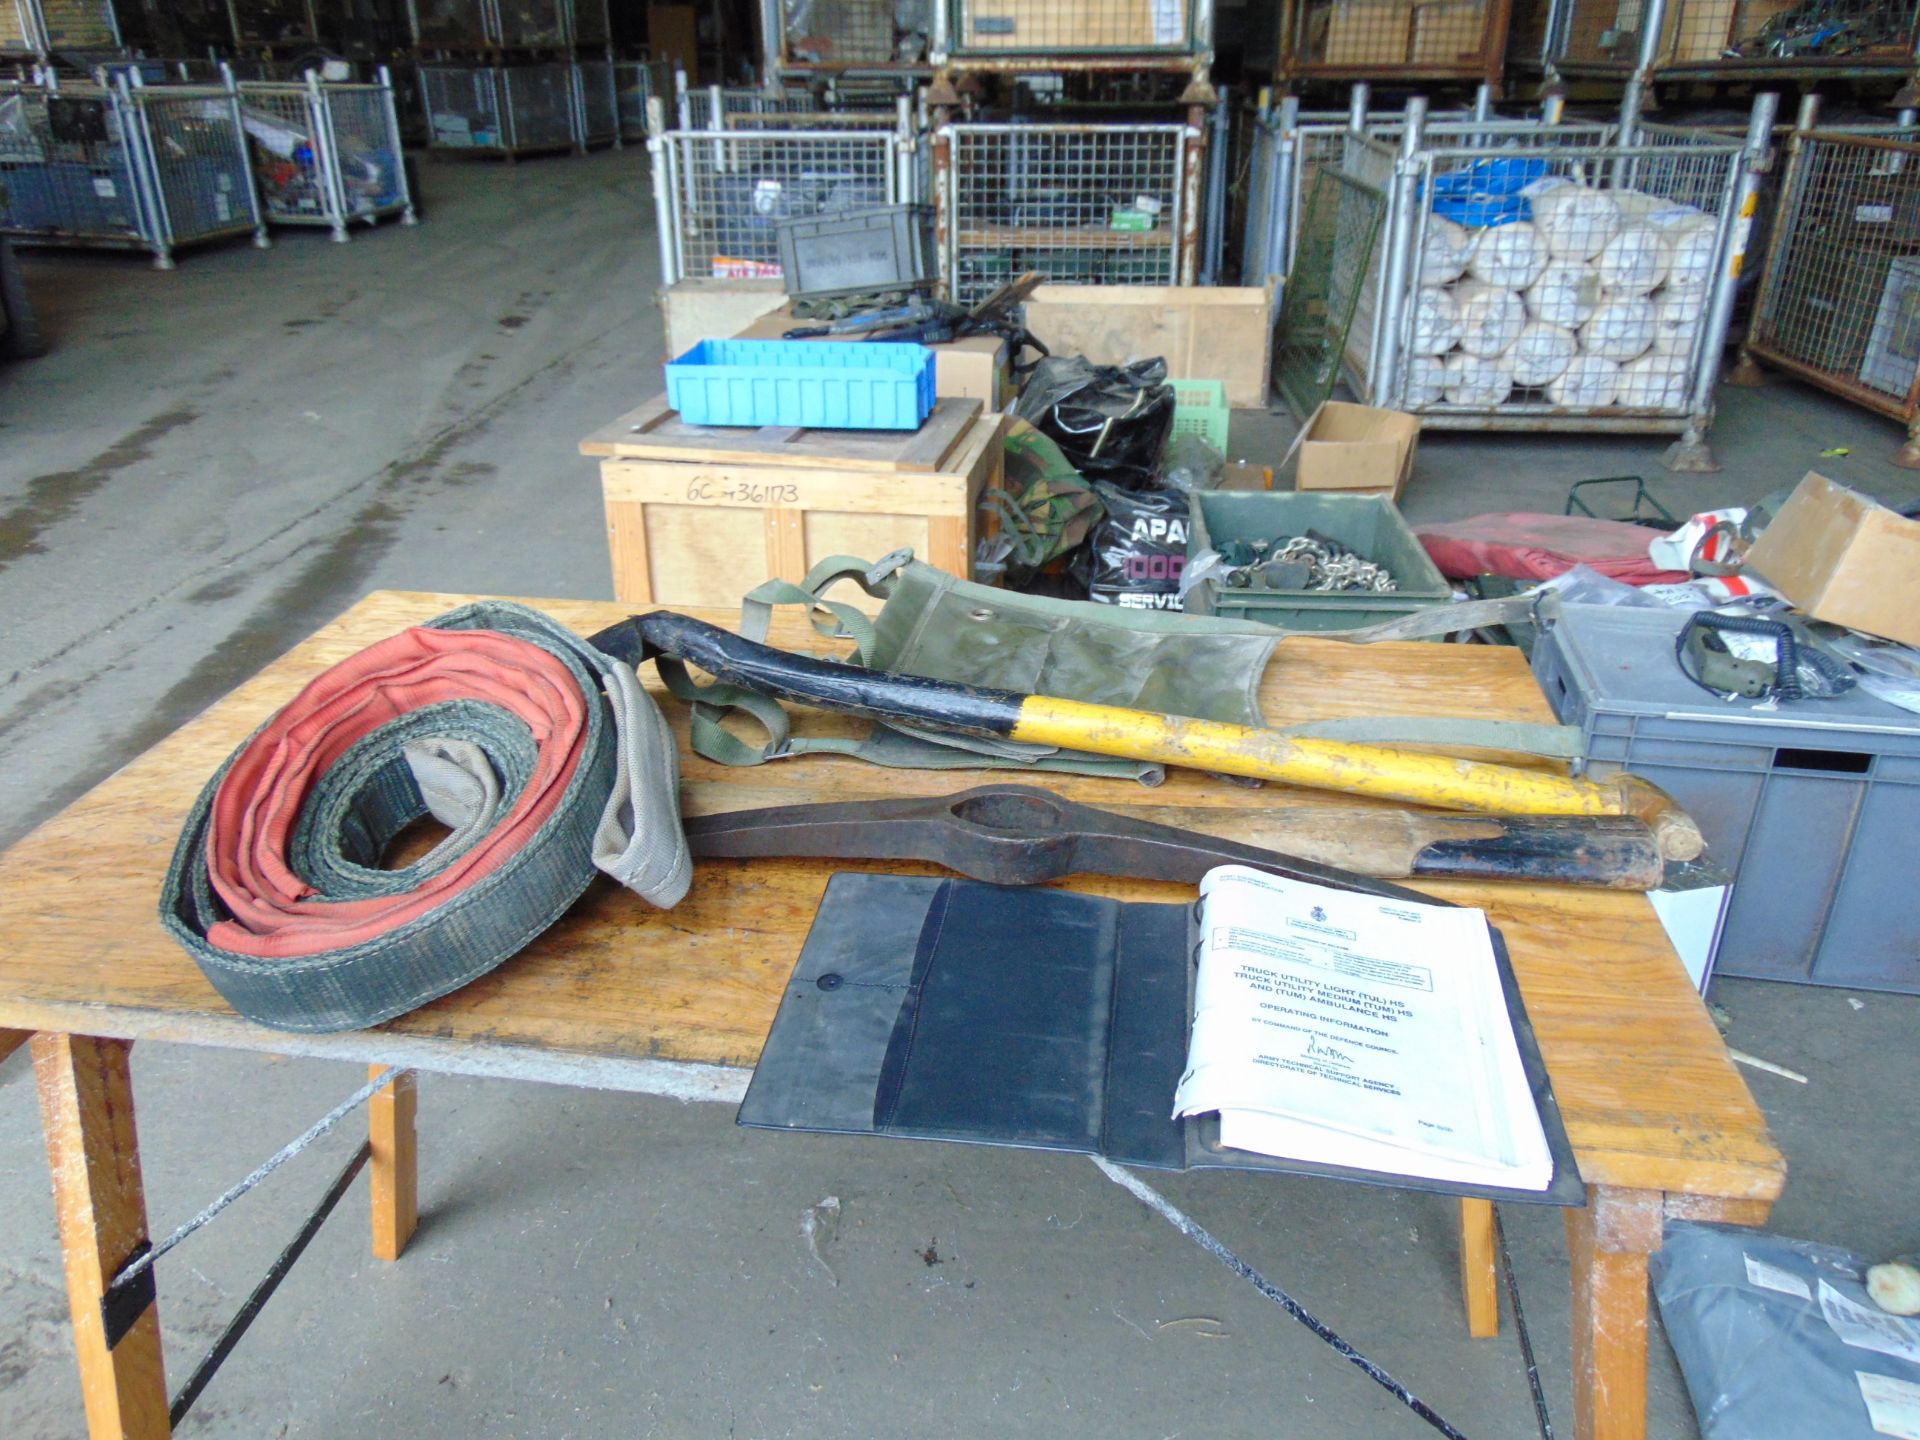 1 Set of Land Rover Wolf Pioneer Tools, Tow Rope, Spare Wheel Carrier and Manual - Image 7 of 7